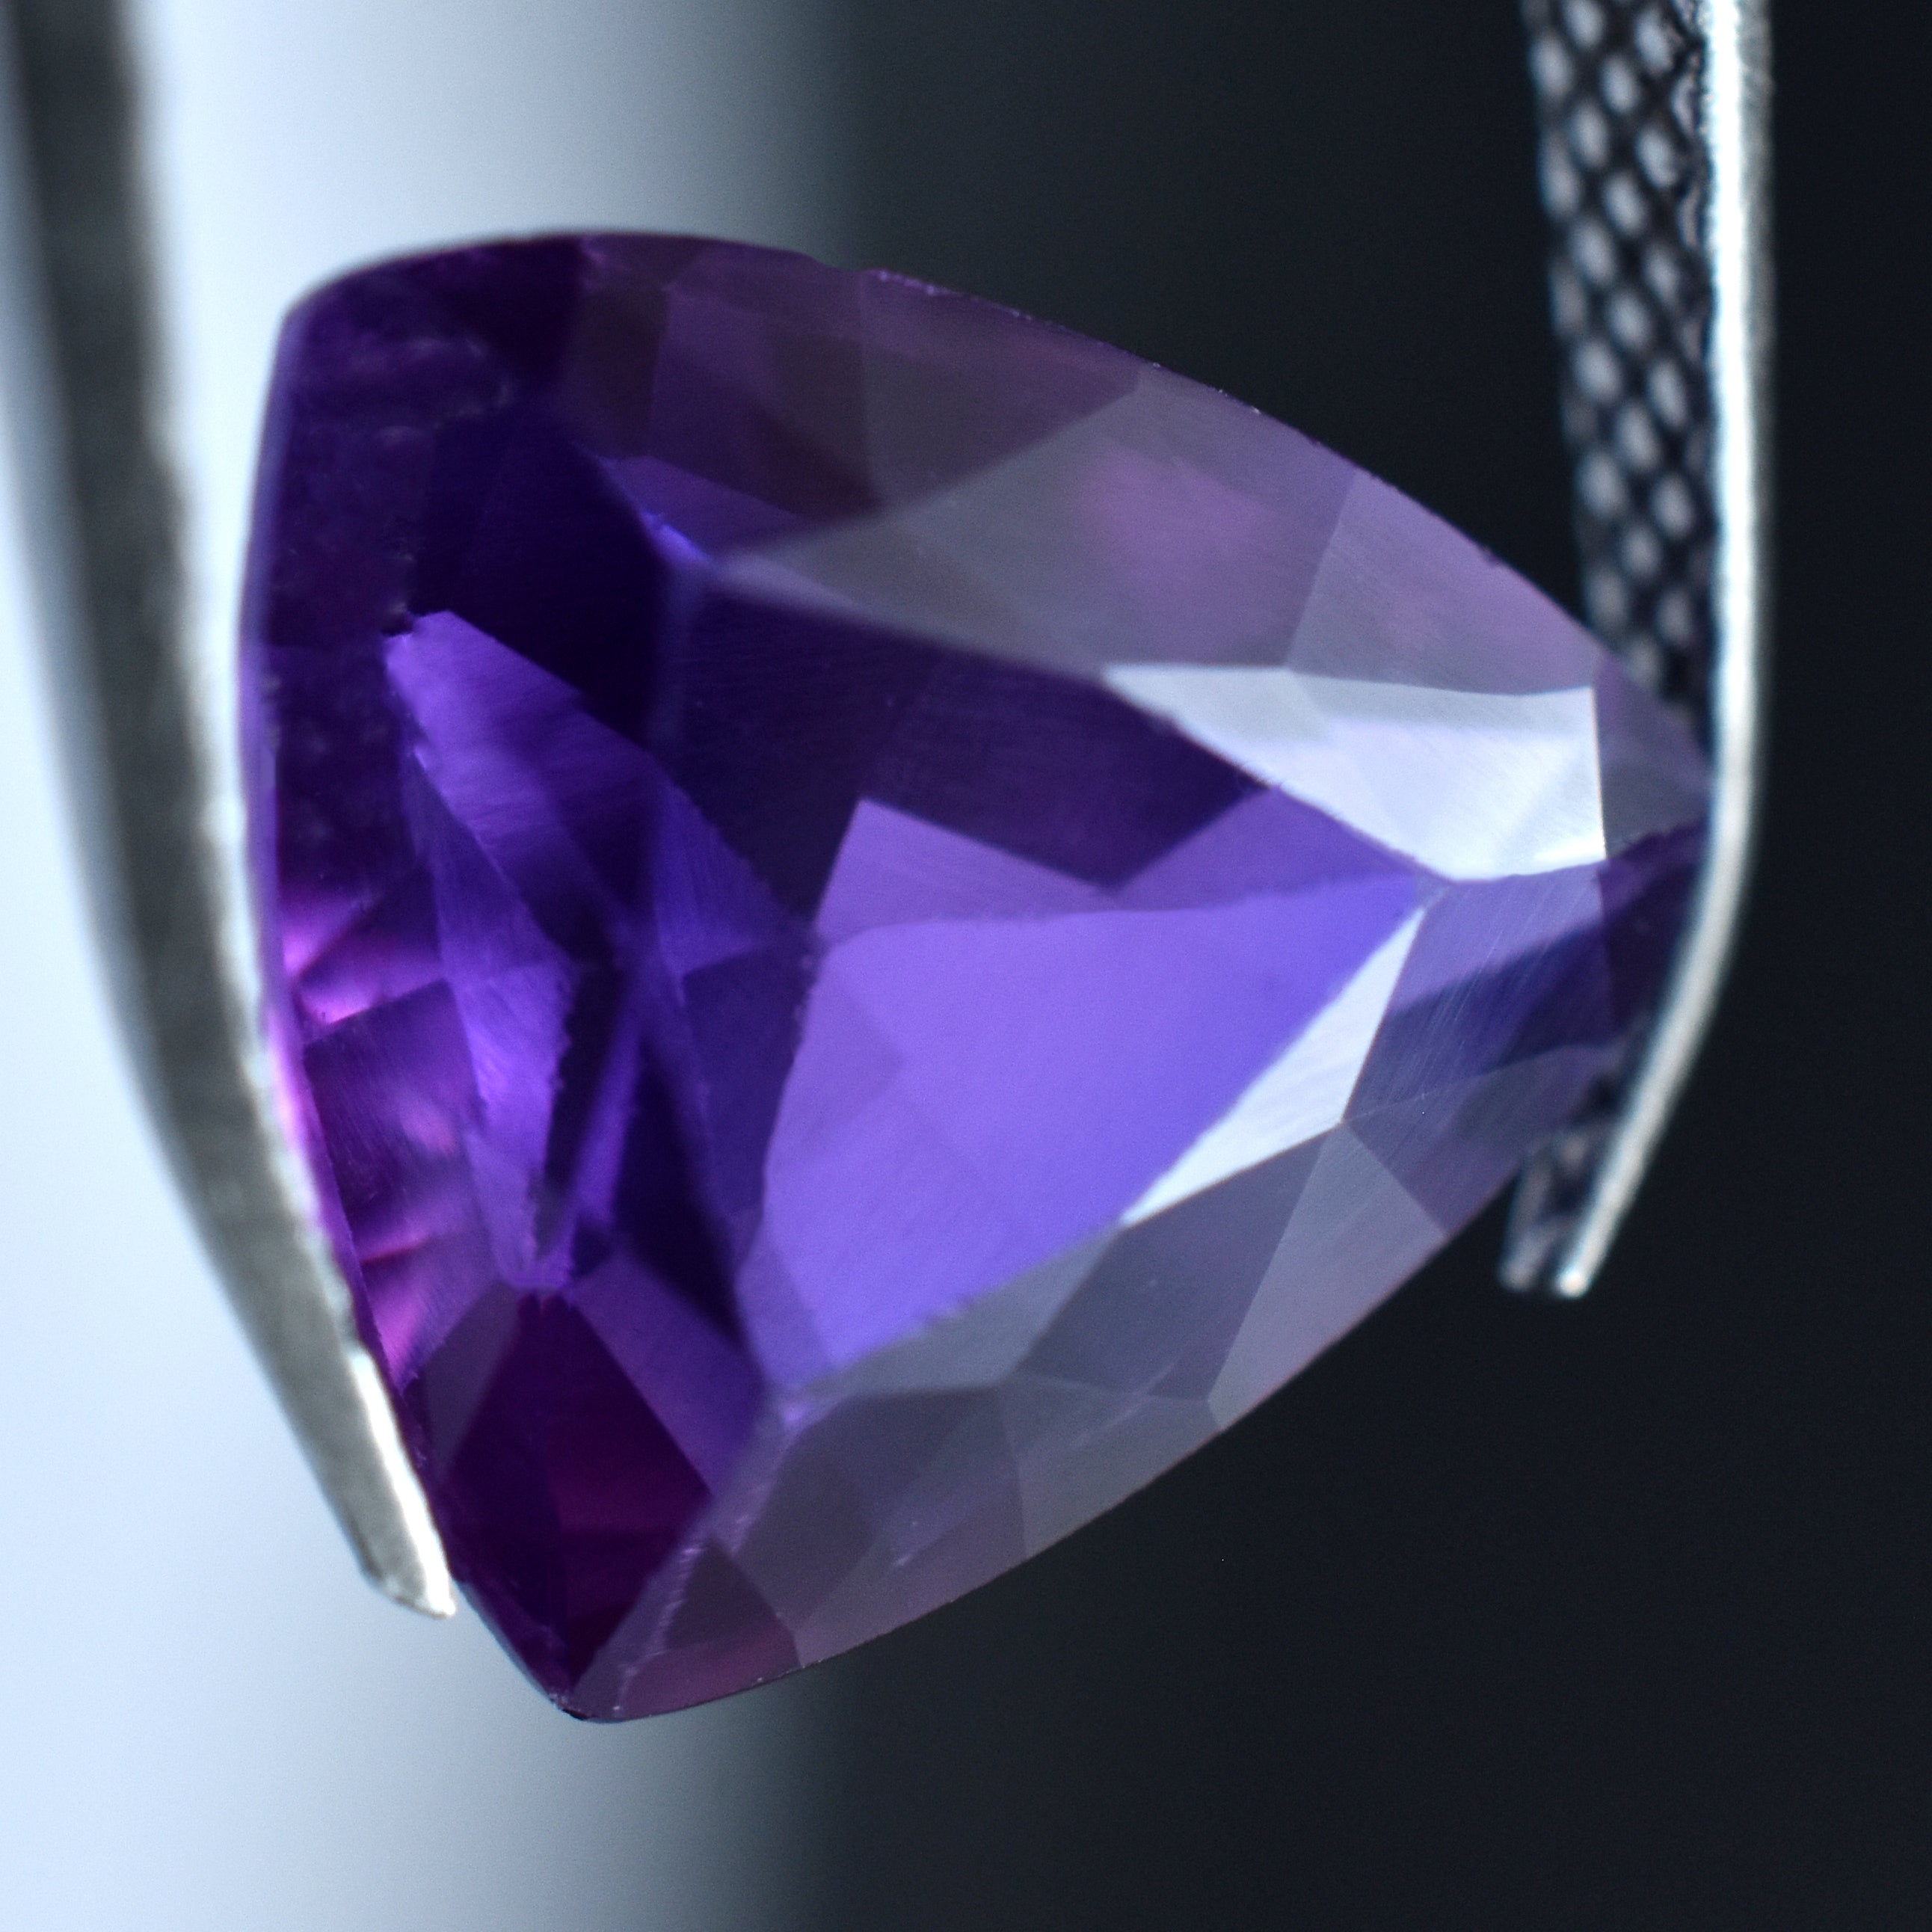 Natural Loose Gemstone faceted Trillion Cut Attractive Stone 12.52 Ct Purple Sapphire CERTIFEID Color Change Trillion Cut Gem | Best For Symbolism & Versatility | Free Shipping With Amazing Gift